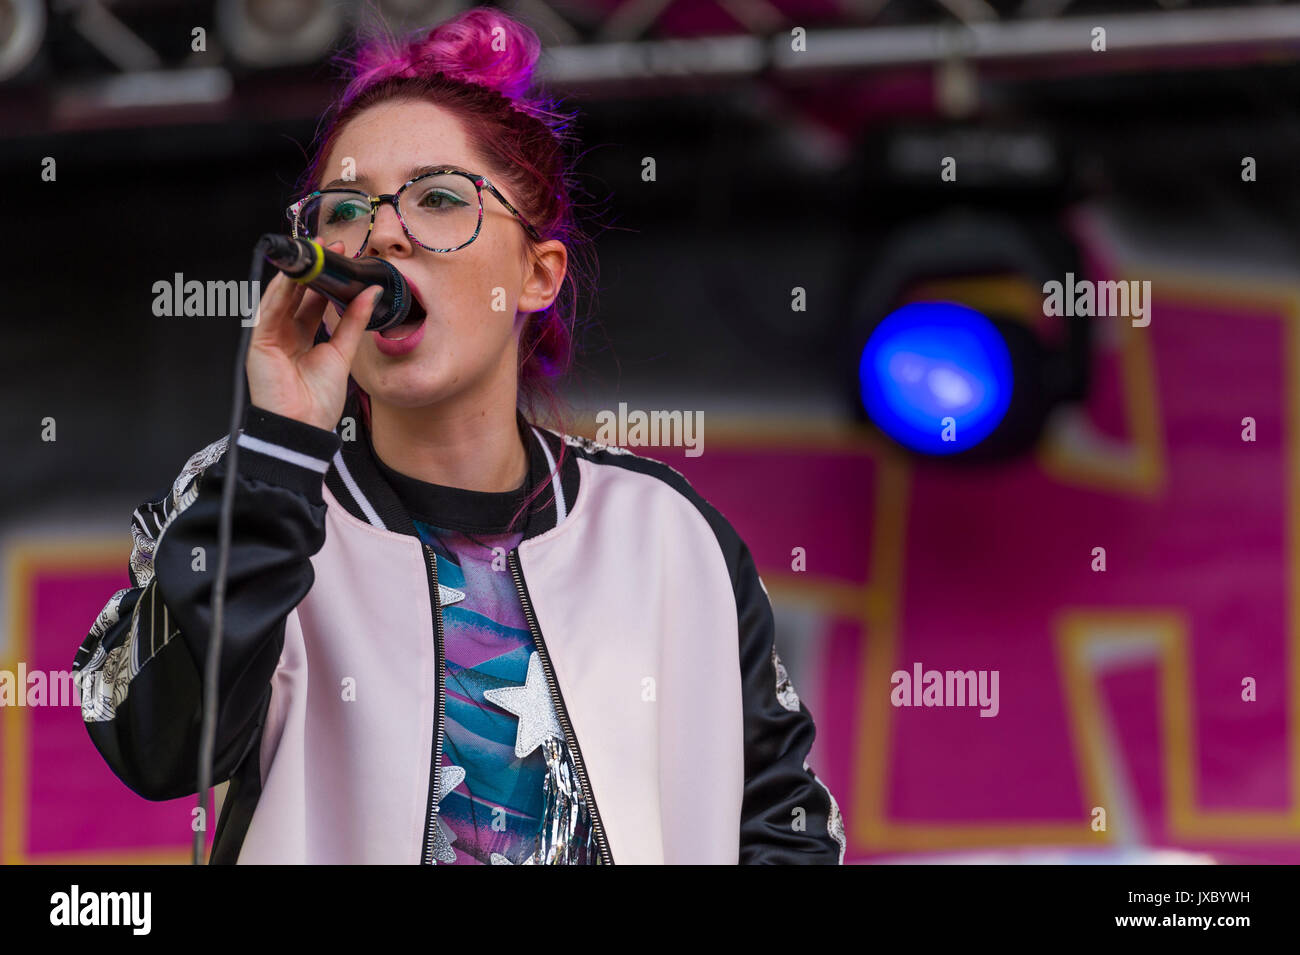 Dumfries, Scotland - August 12, 2017: Charlotte Brimner of Scottish band Be Charlotte performing at Youth Beats. Stock Photo